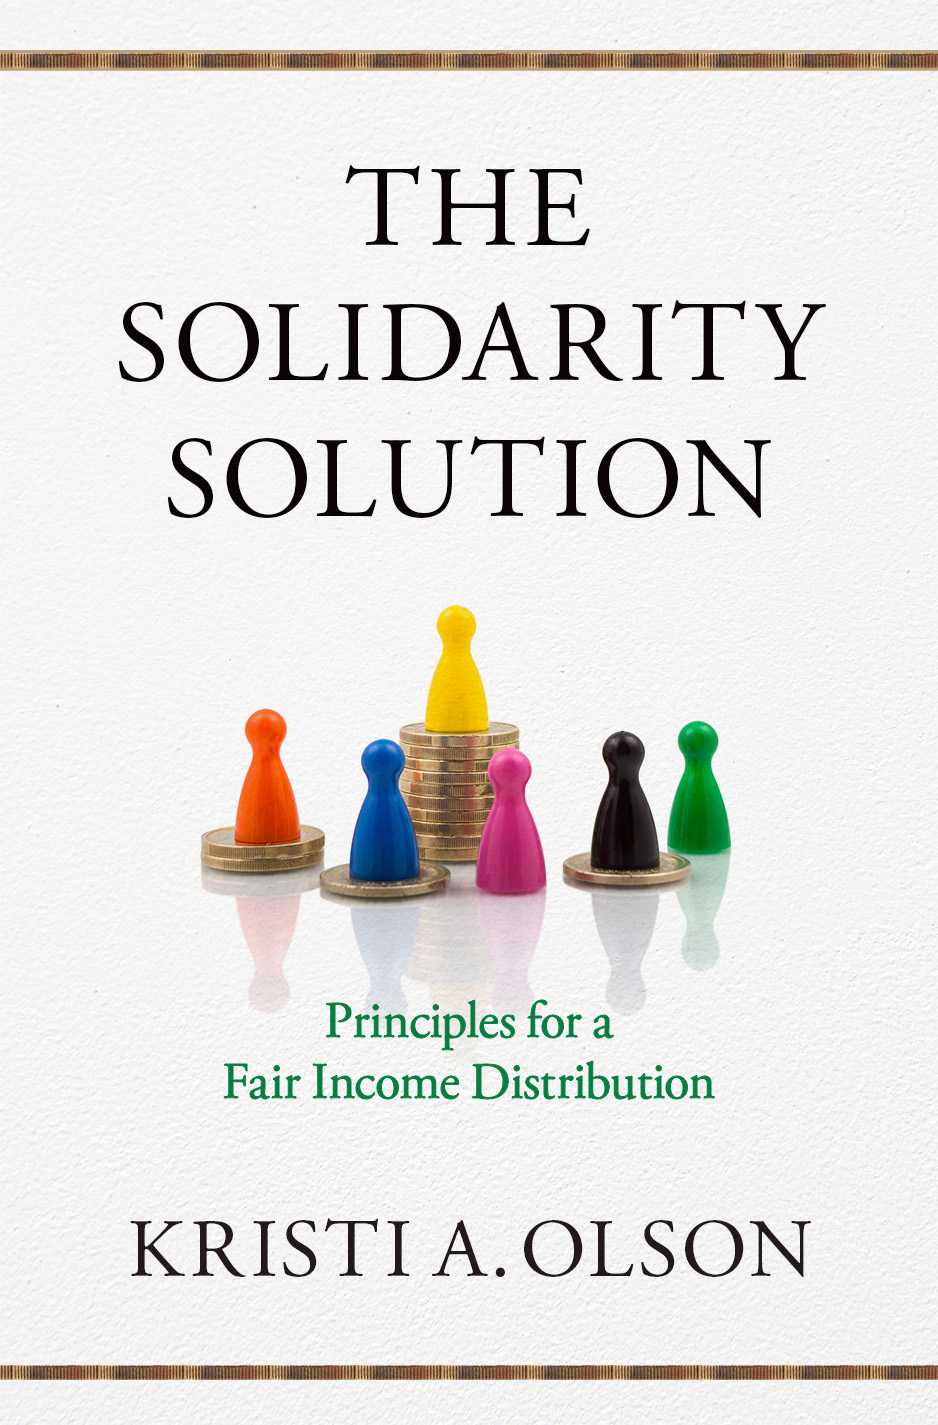 The solidarity solution book cover